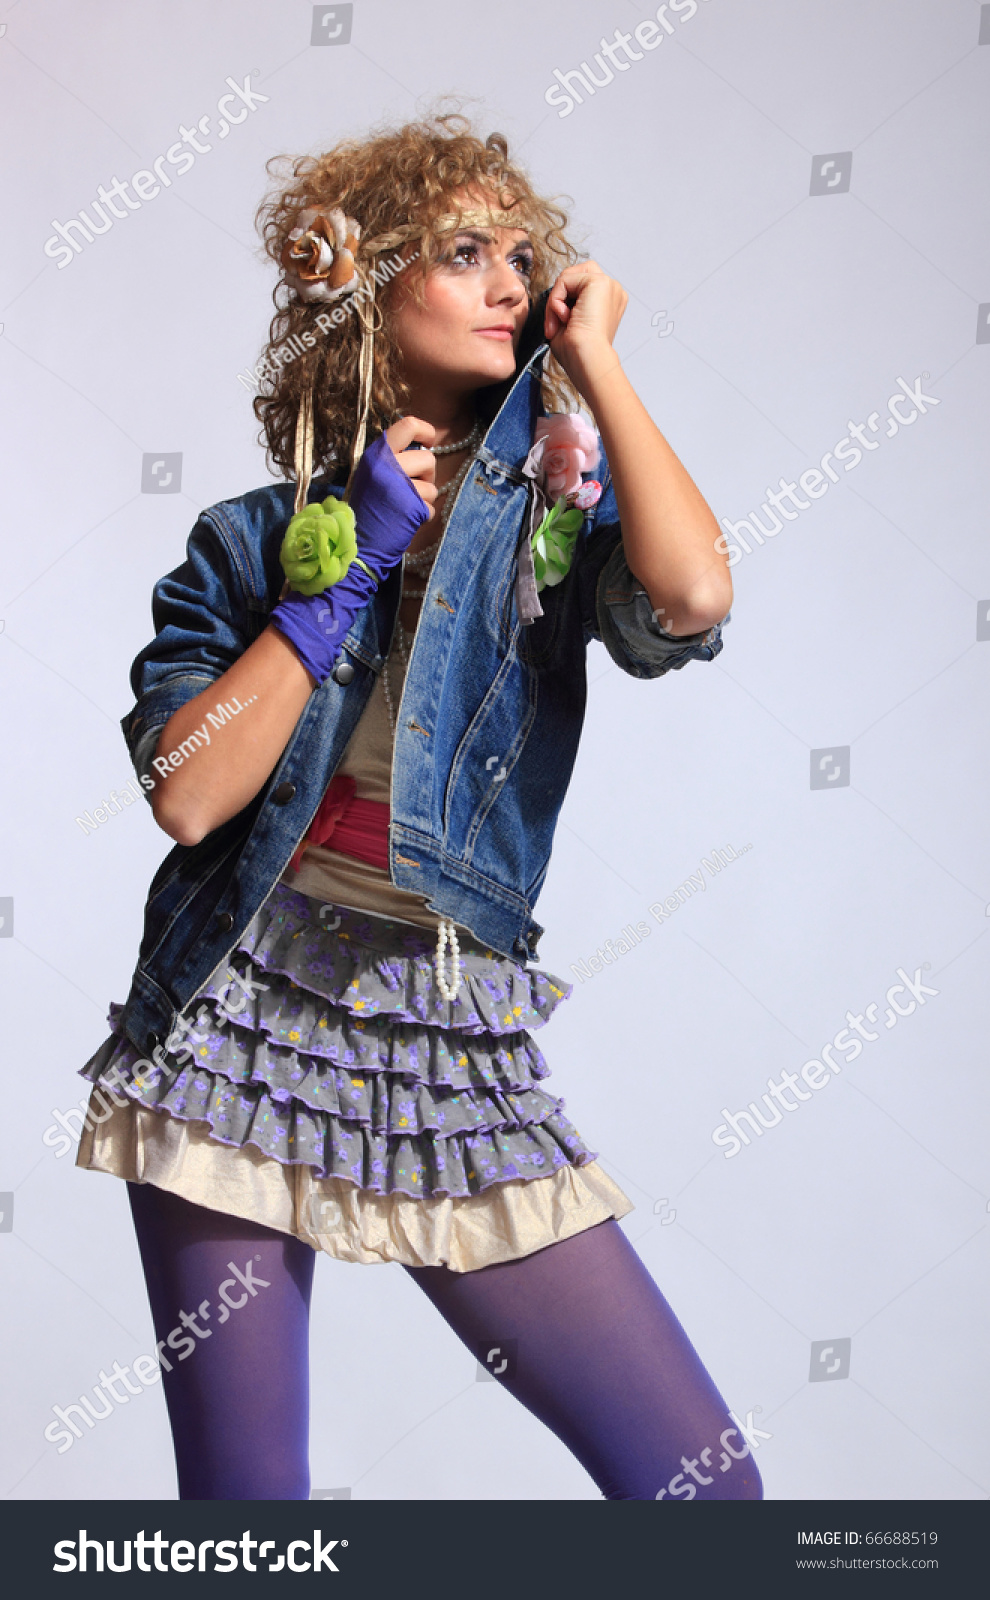 80'S Fashion Woman Over Gray Background Stock Photo 66688519 : Shutterstock